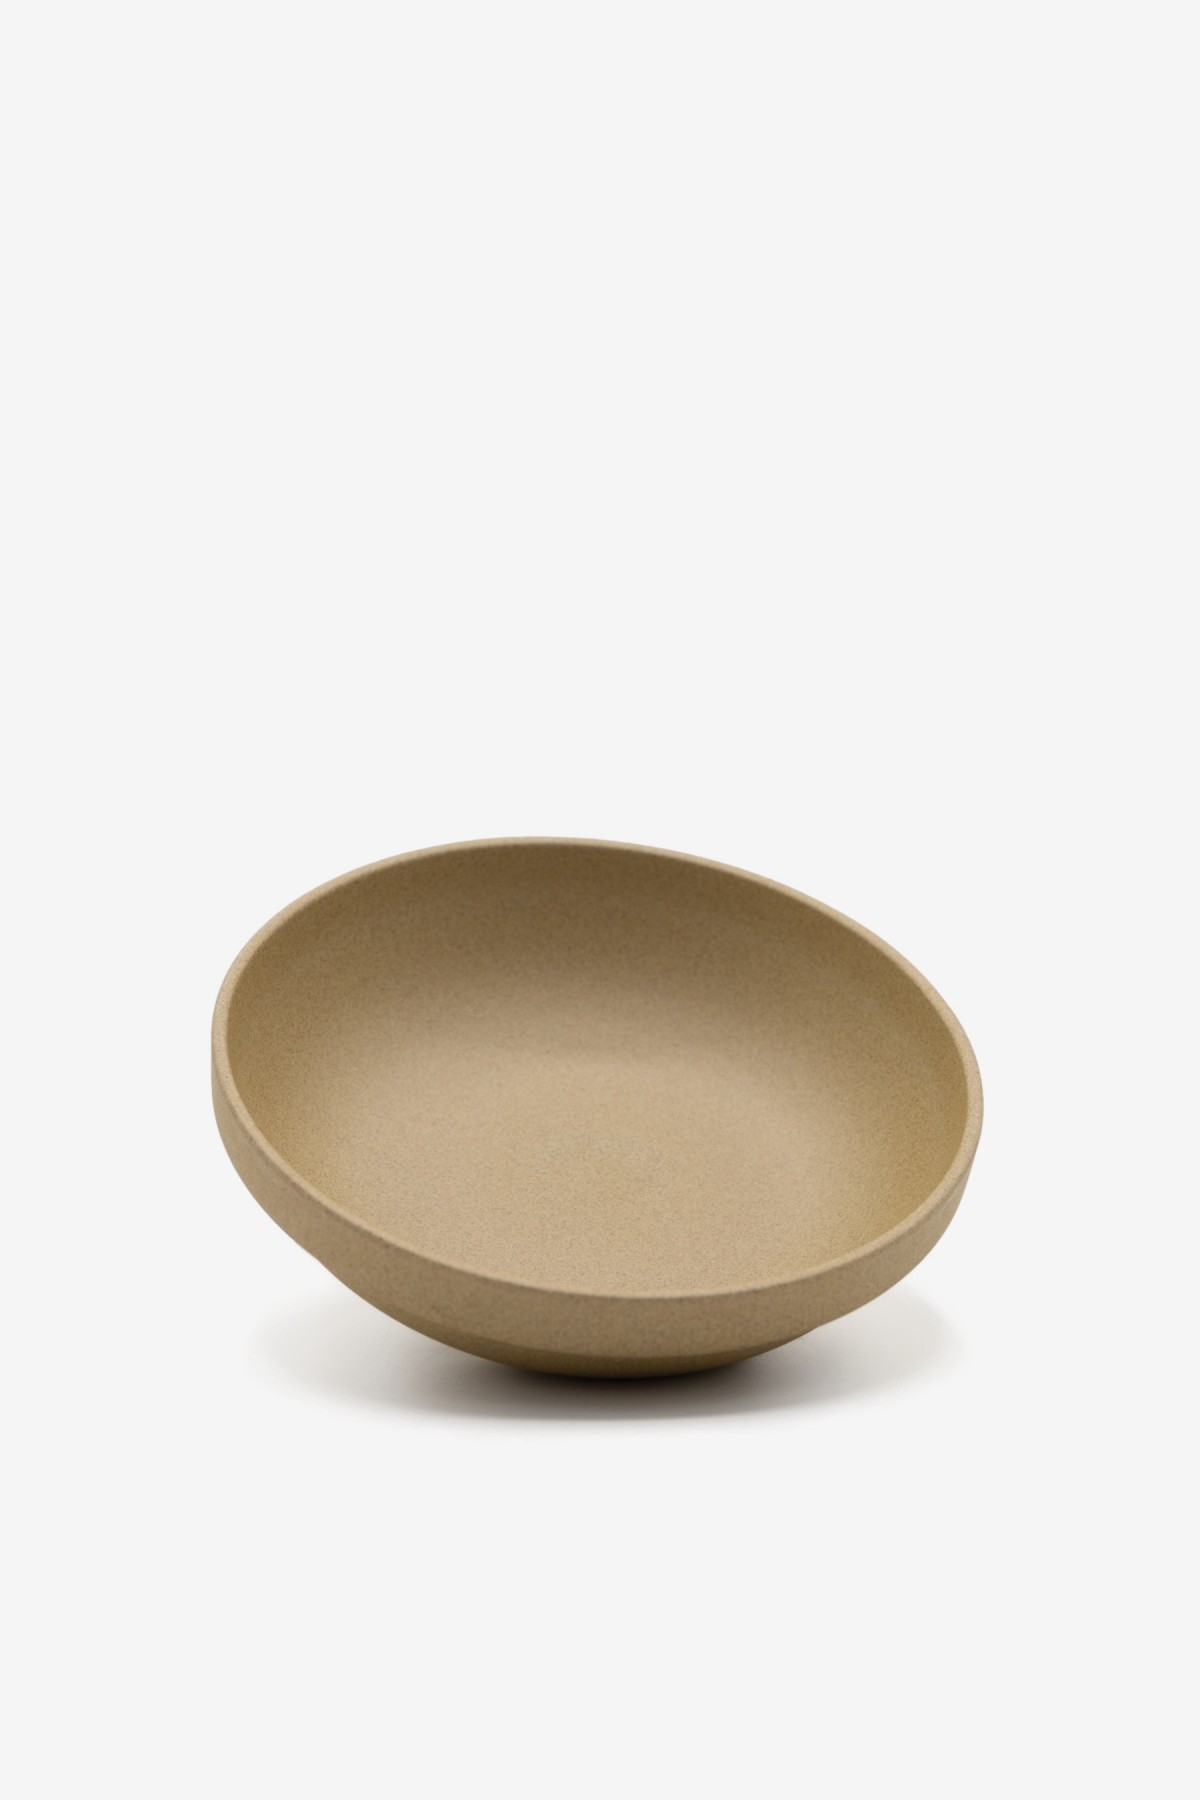 Hasami Porcelain Bowl Round 185x55 in Sand